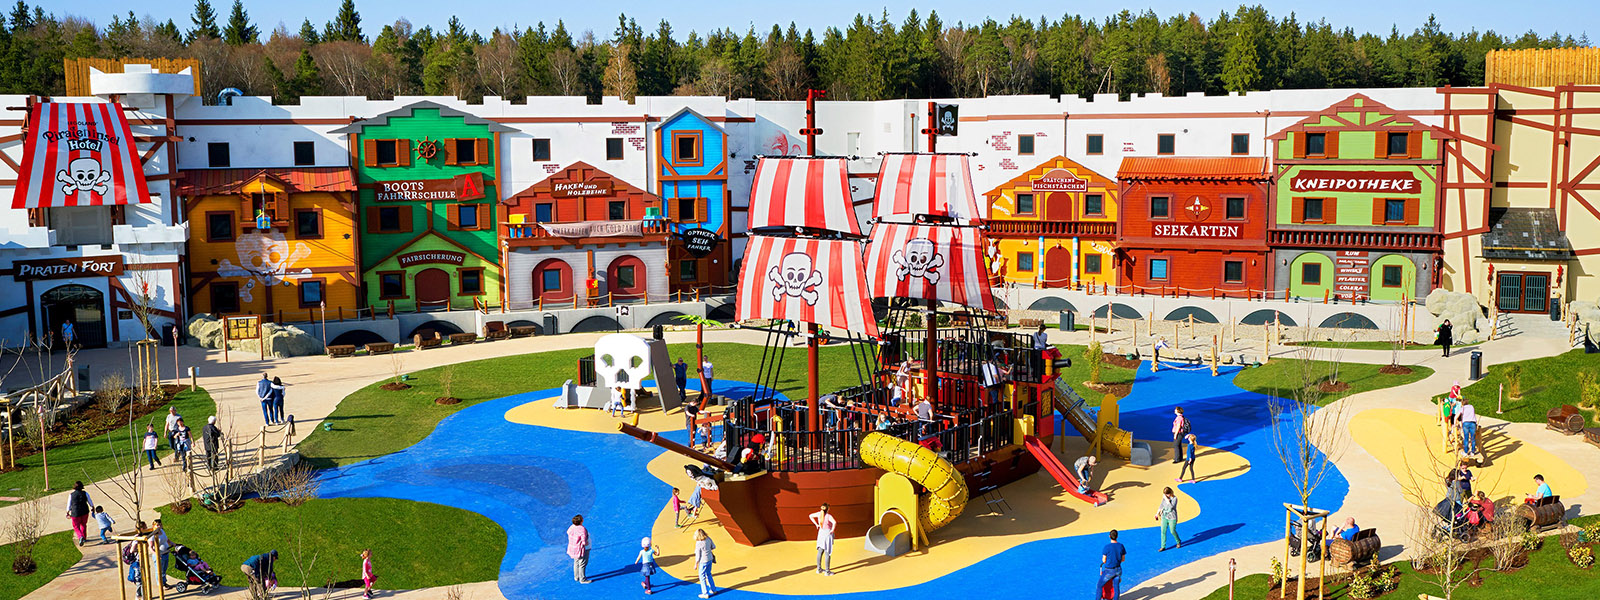 The centerpiece of this children's paradise is the impressive pirate ship in front of the Pirate Island Hotel